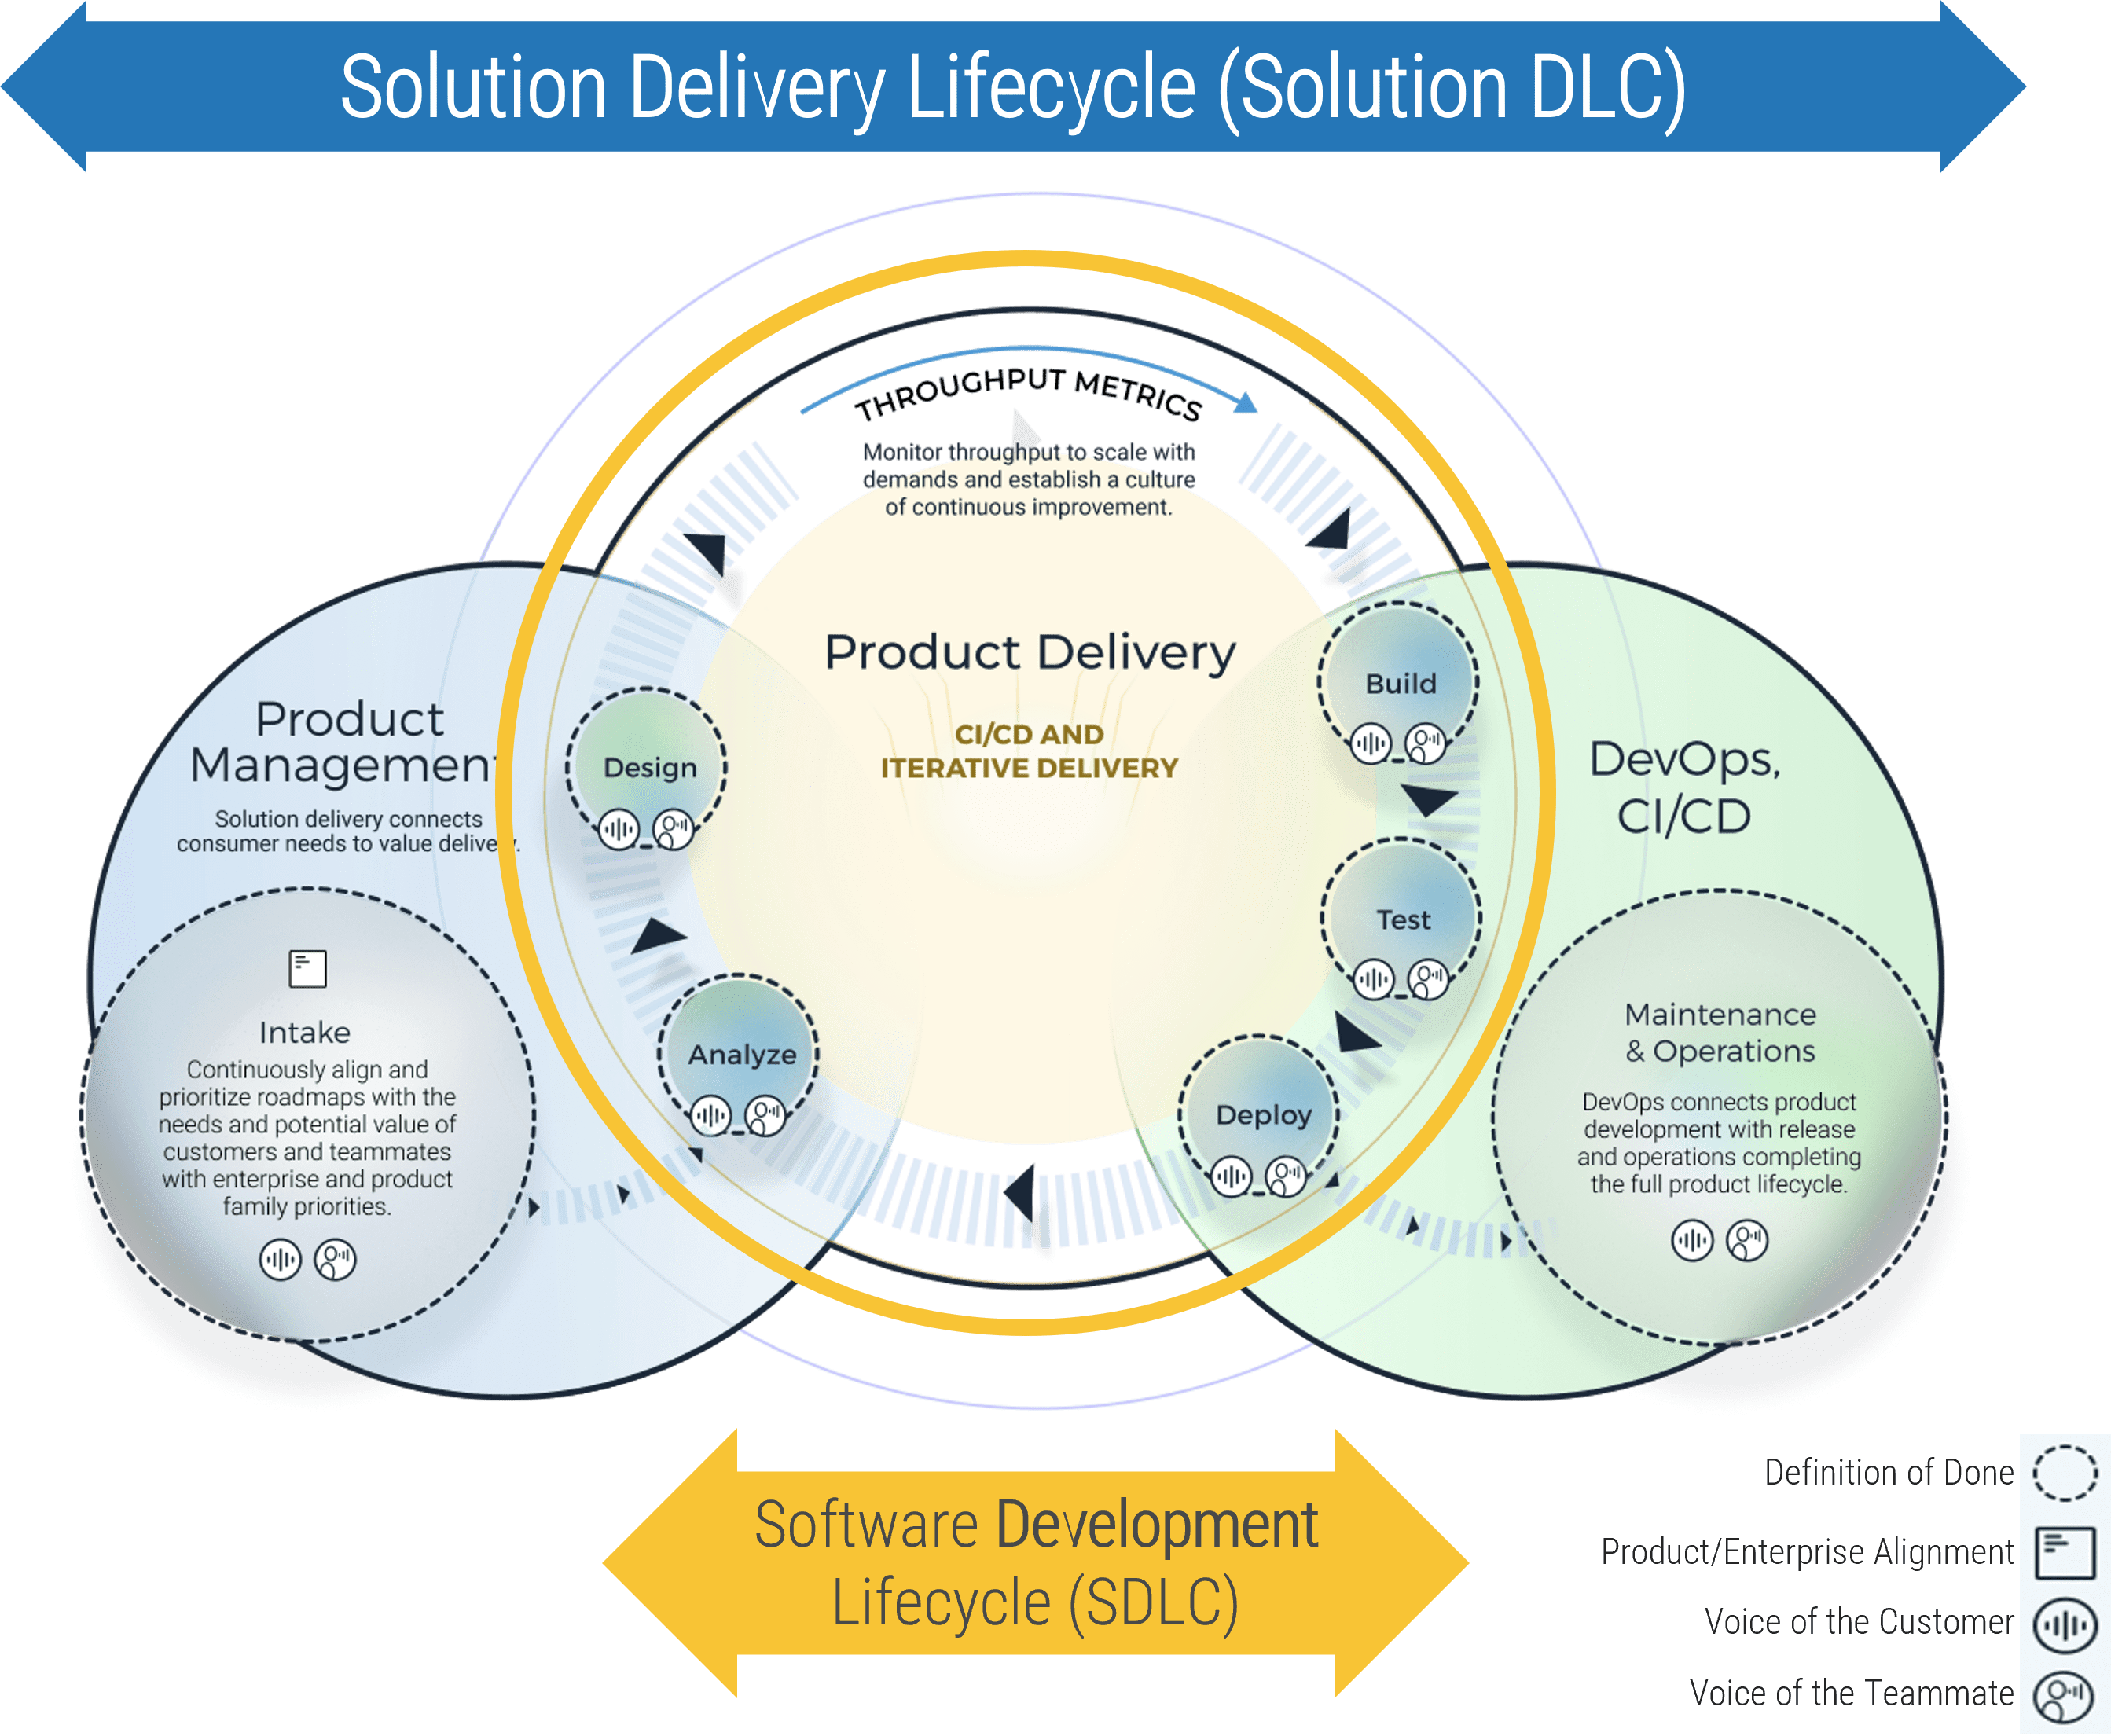 Same diagram of phase circles, but with the center circle 'Product Delivery' highlighted and a two-way arrow beneath it labelled 'Software Development Lifecycle (SDLC)'.